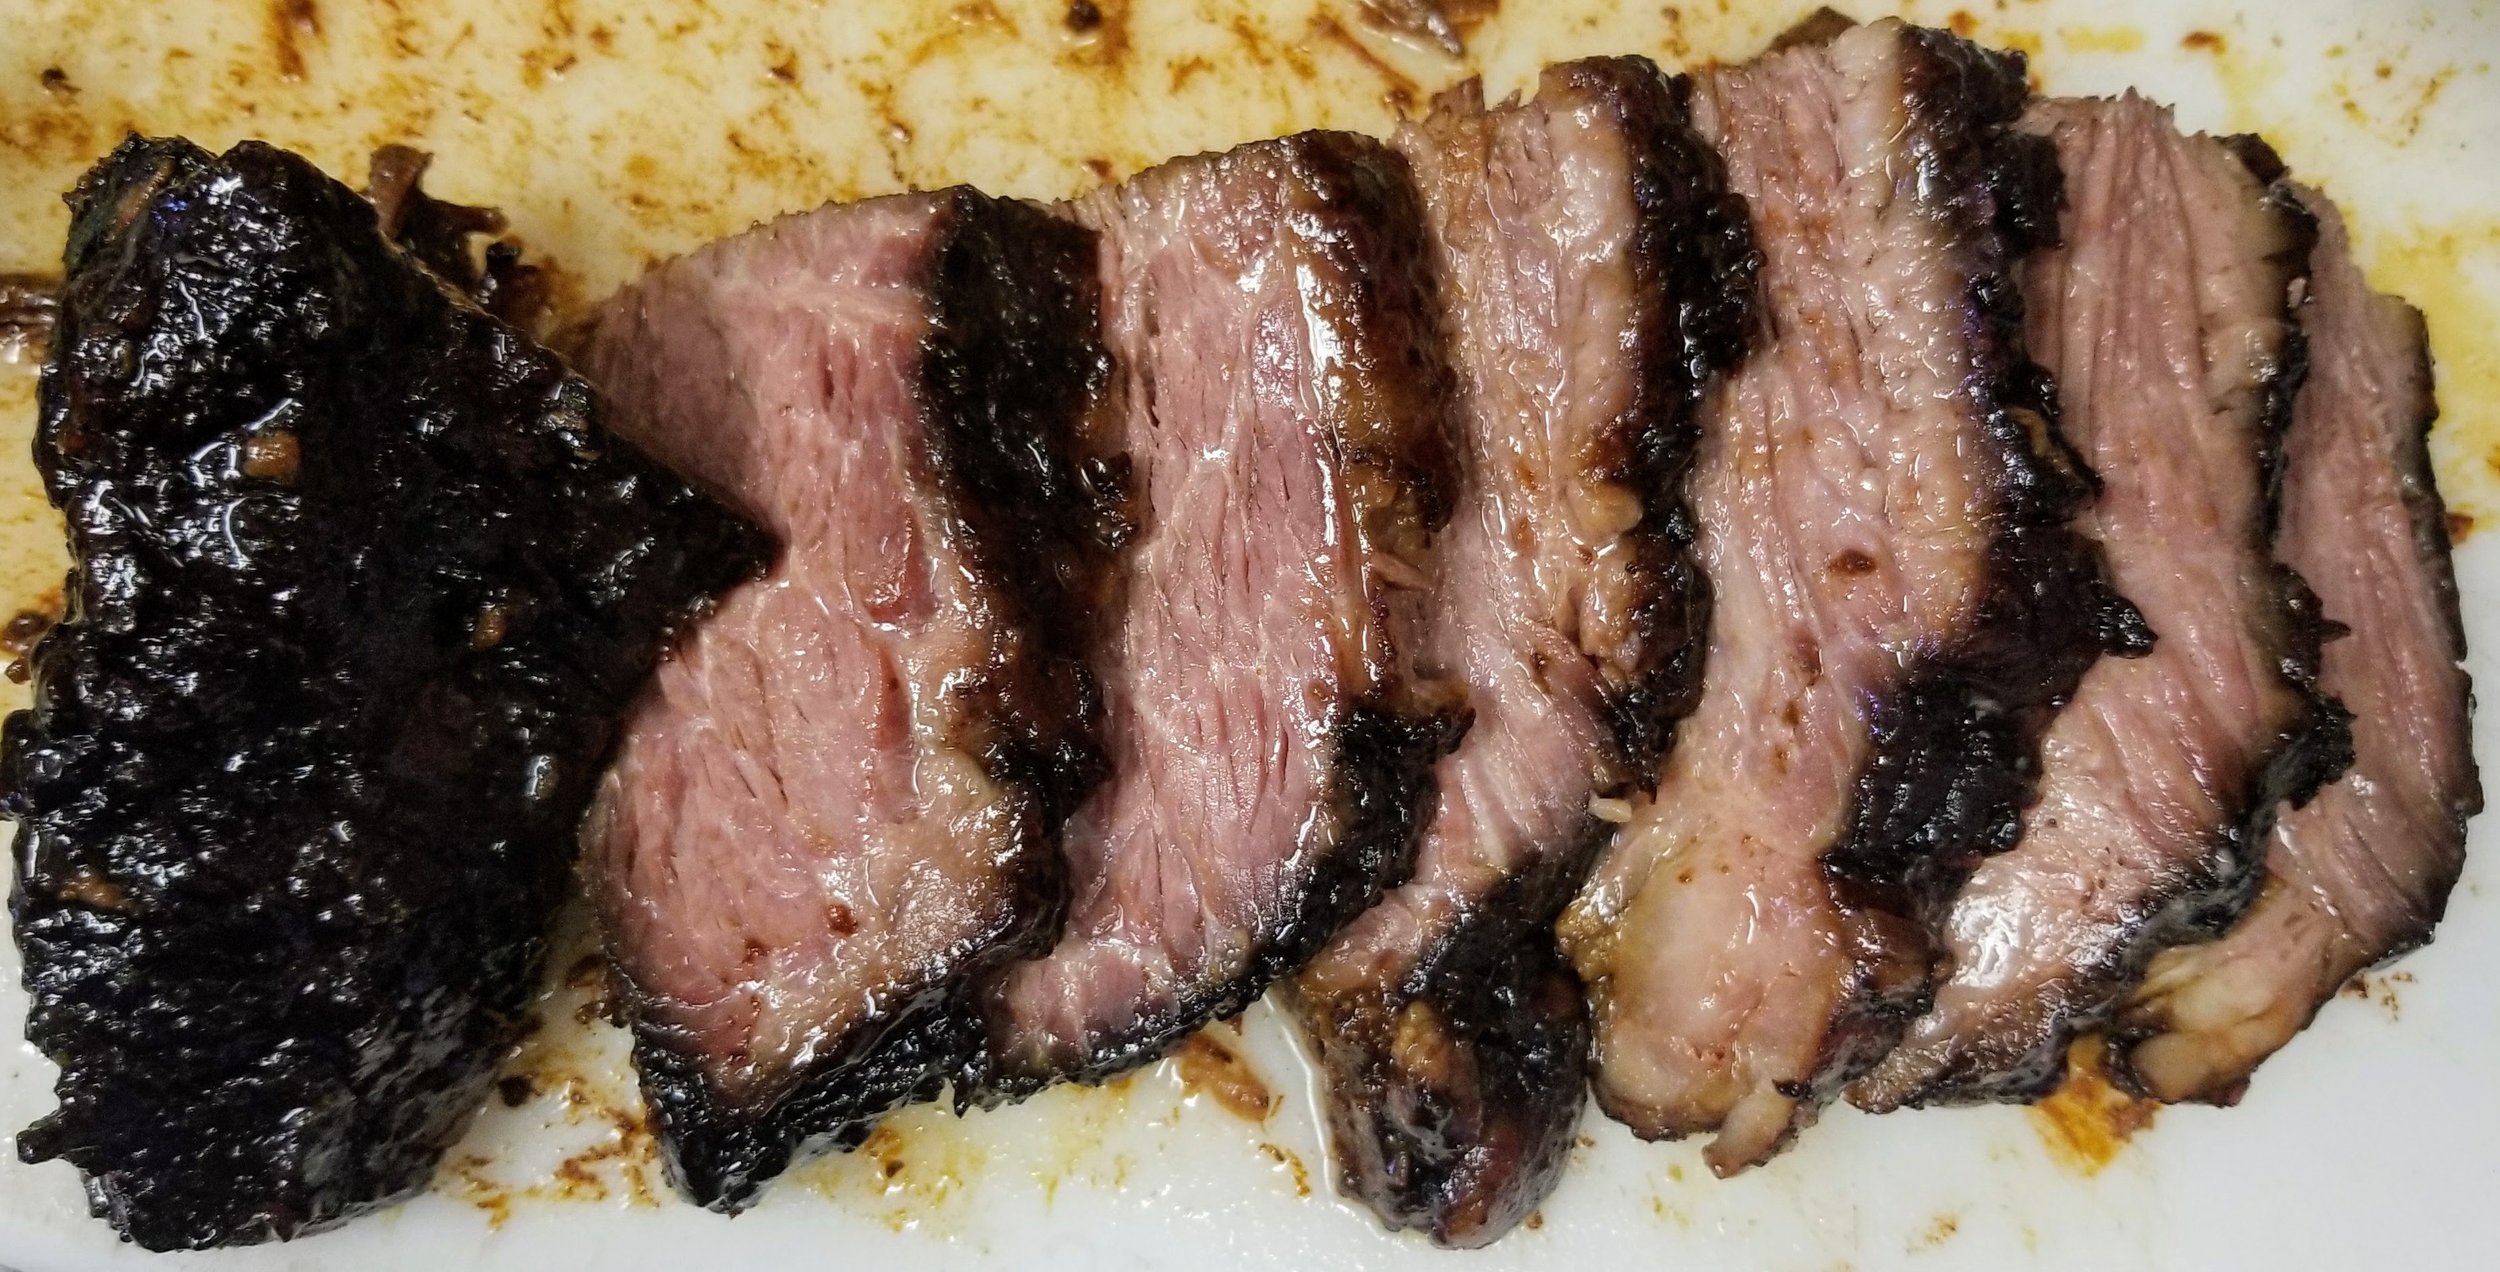 our misoyaki brisket, sliced after cooking before getting glazed